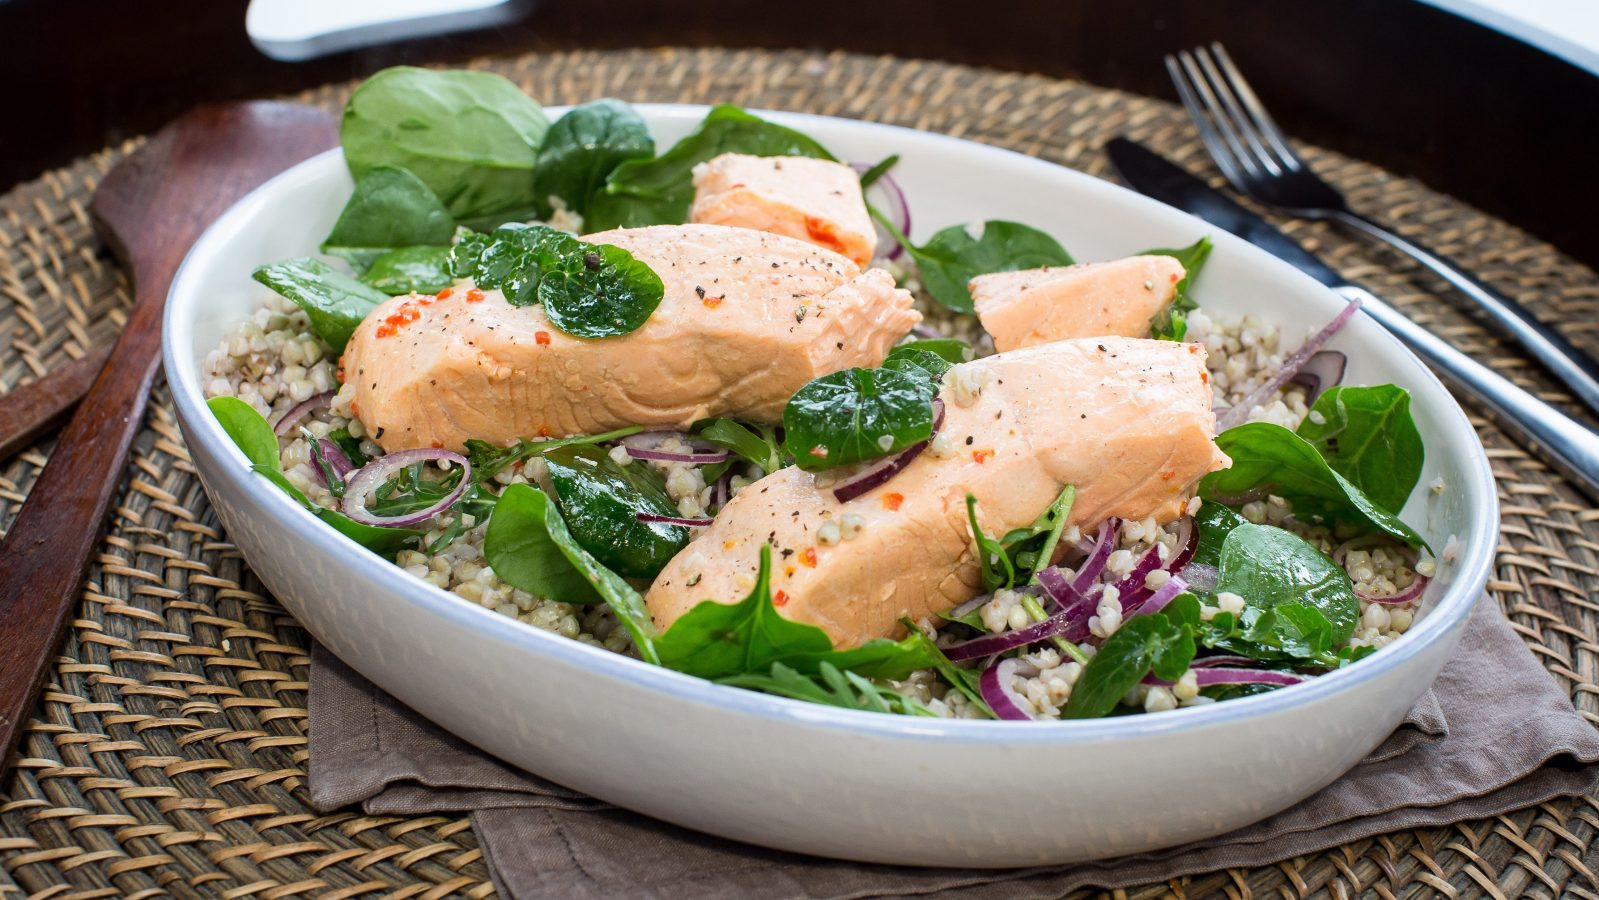 Two cooked pieces of salmon on grain and green salad in oval bowl, on a tray with forks.